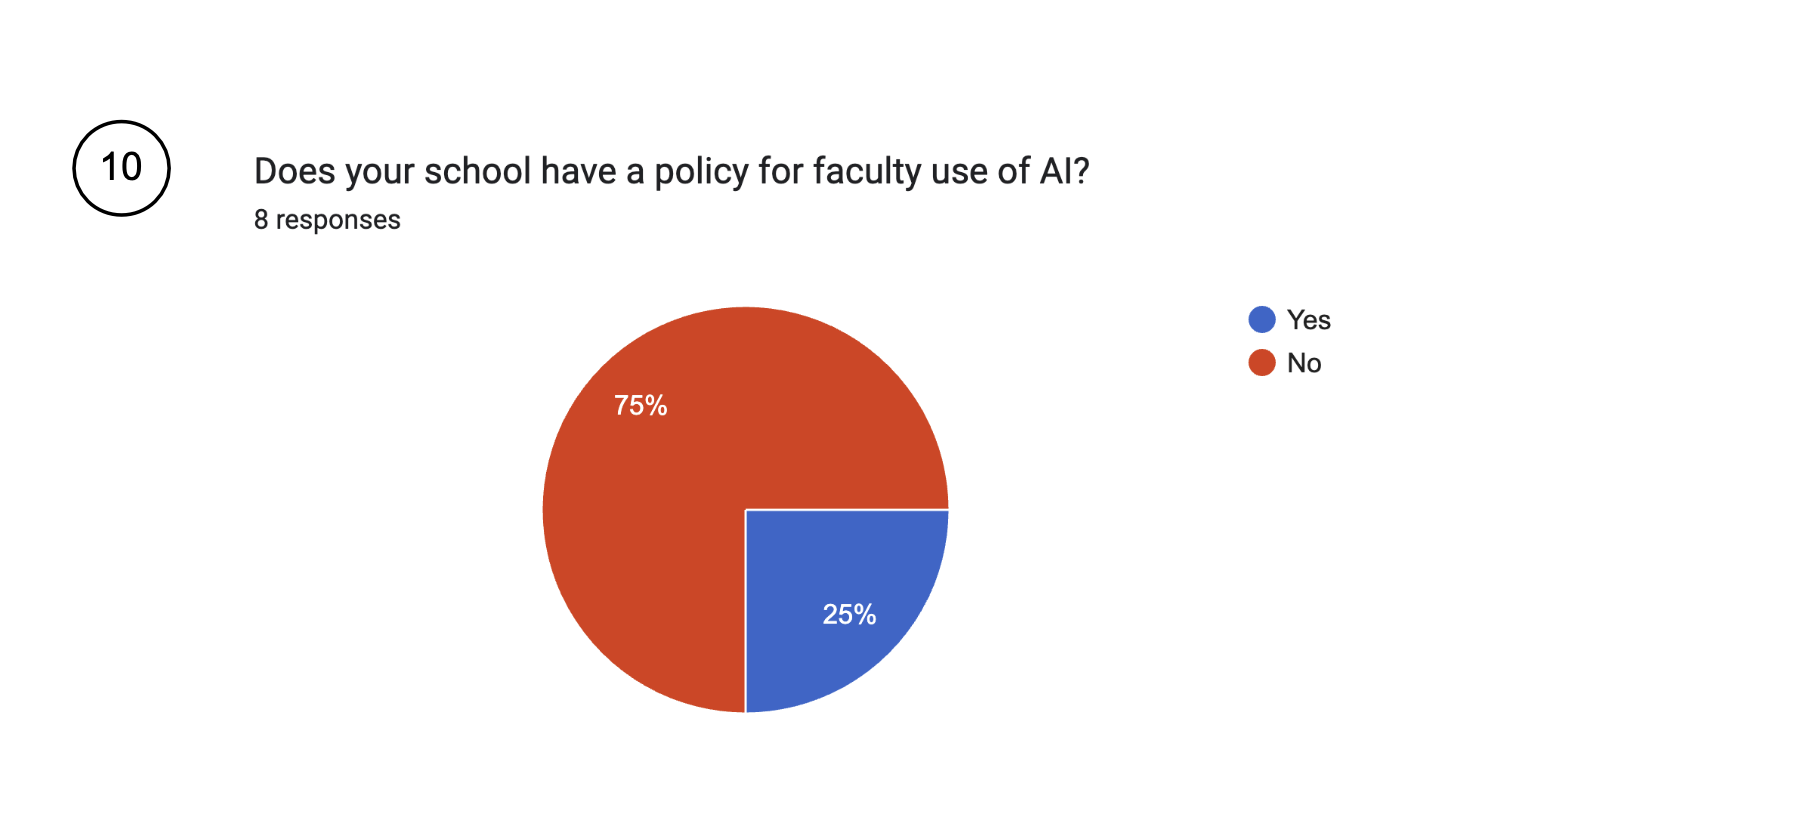 Does your school have a policy for faculty use of AI?